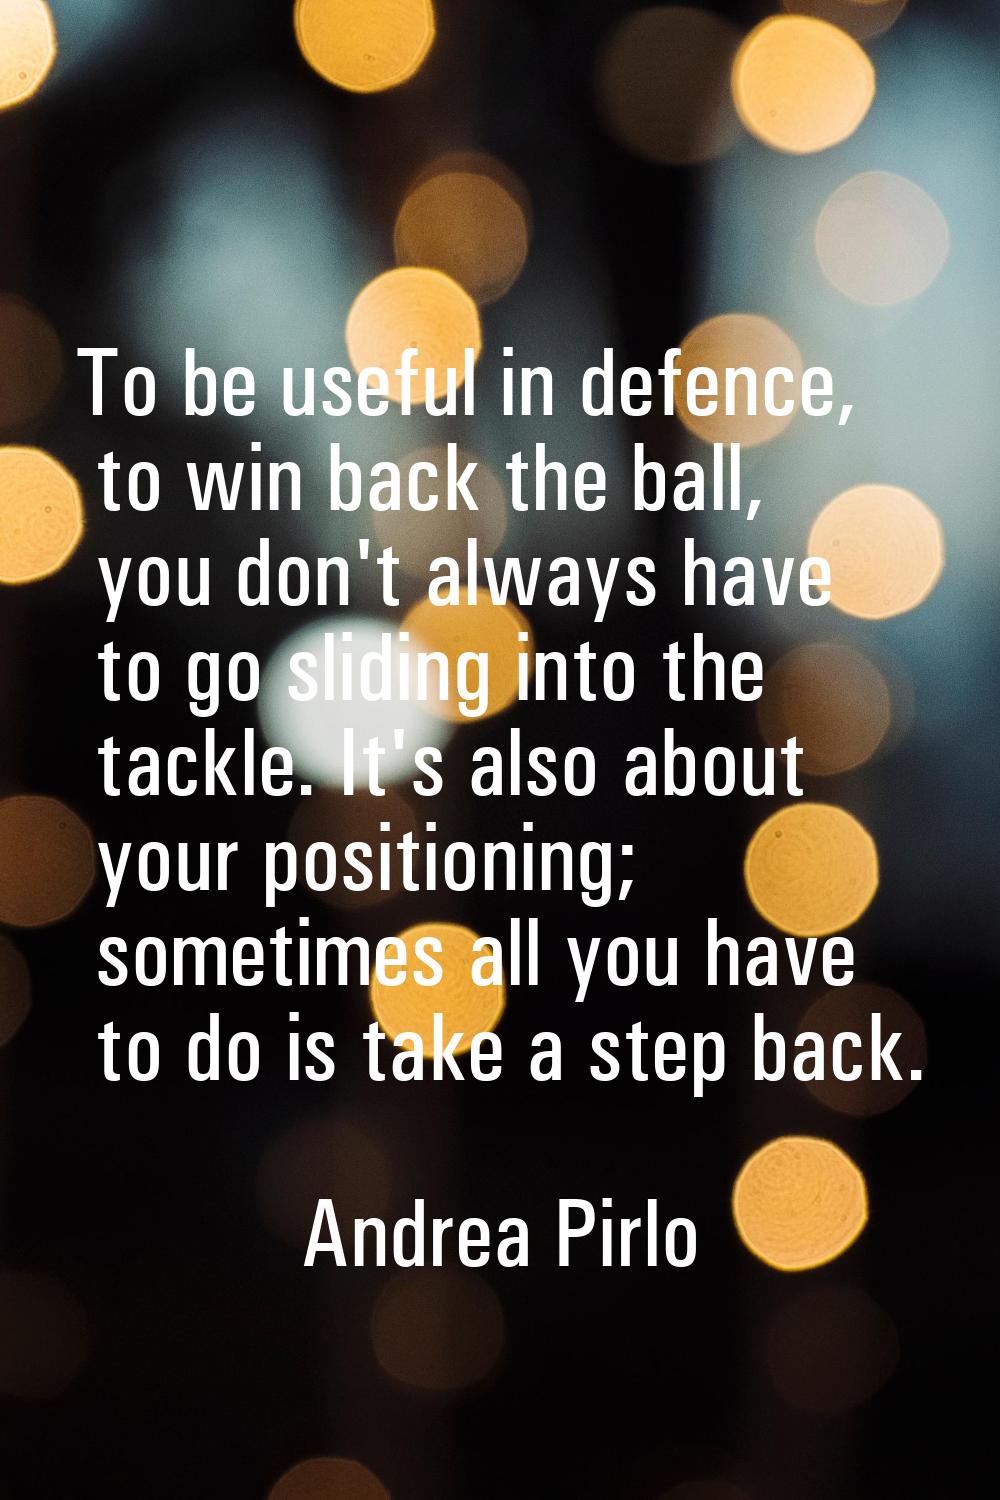 To be useful in defence, to win back the ball, you don't always have to go sliding into the tackle.